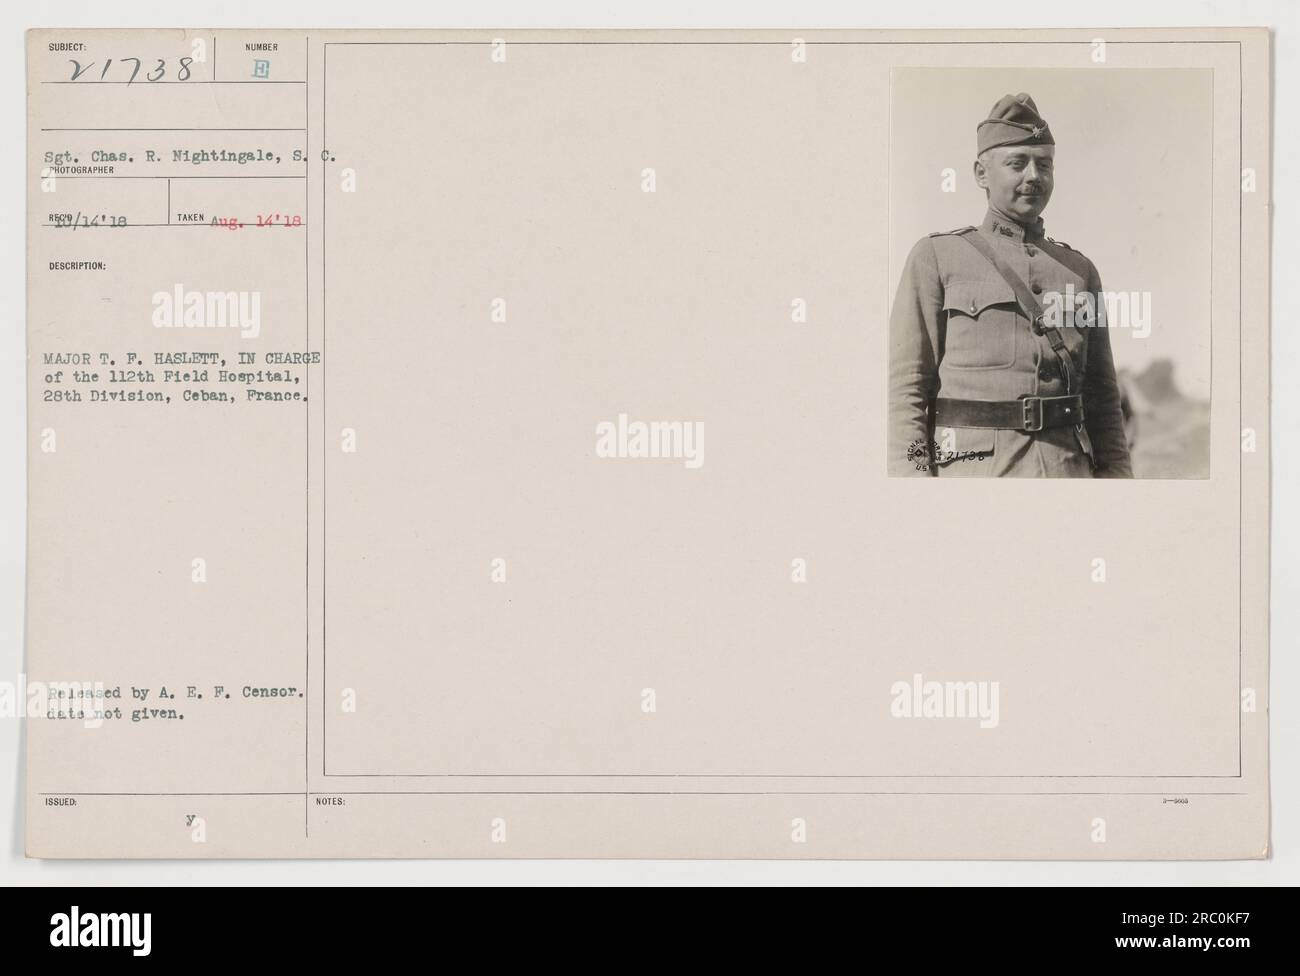 Sergeant Charles R. Nightingale of the Signal Corps is depicted in this photograph. The image was taken on August 14, 1918, and shows Major T. F. Haslett, who was in charge of the 112th Field Hospital, 28th Division, Ceban, France. This photograph was released by the American Expeditionary Forces (A.E.F.) Censor, although the specific date of release is unknown. Stock Photo